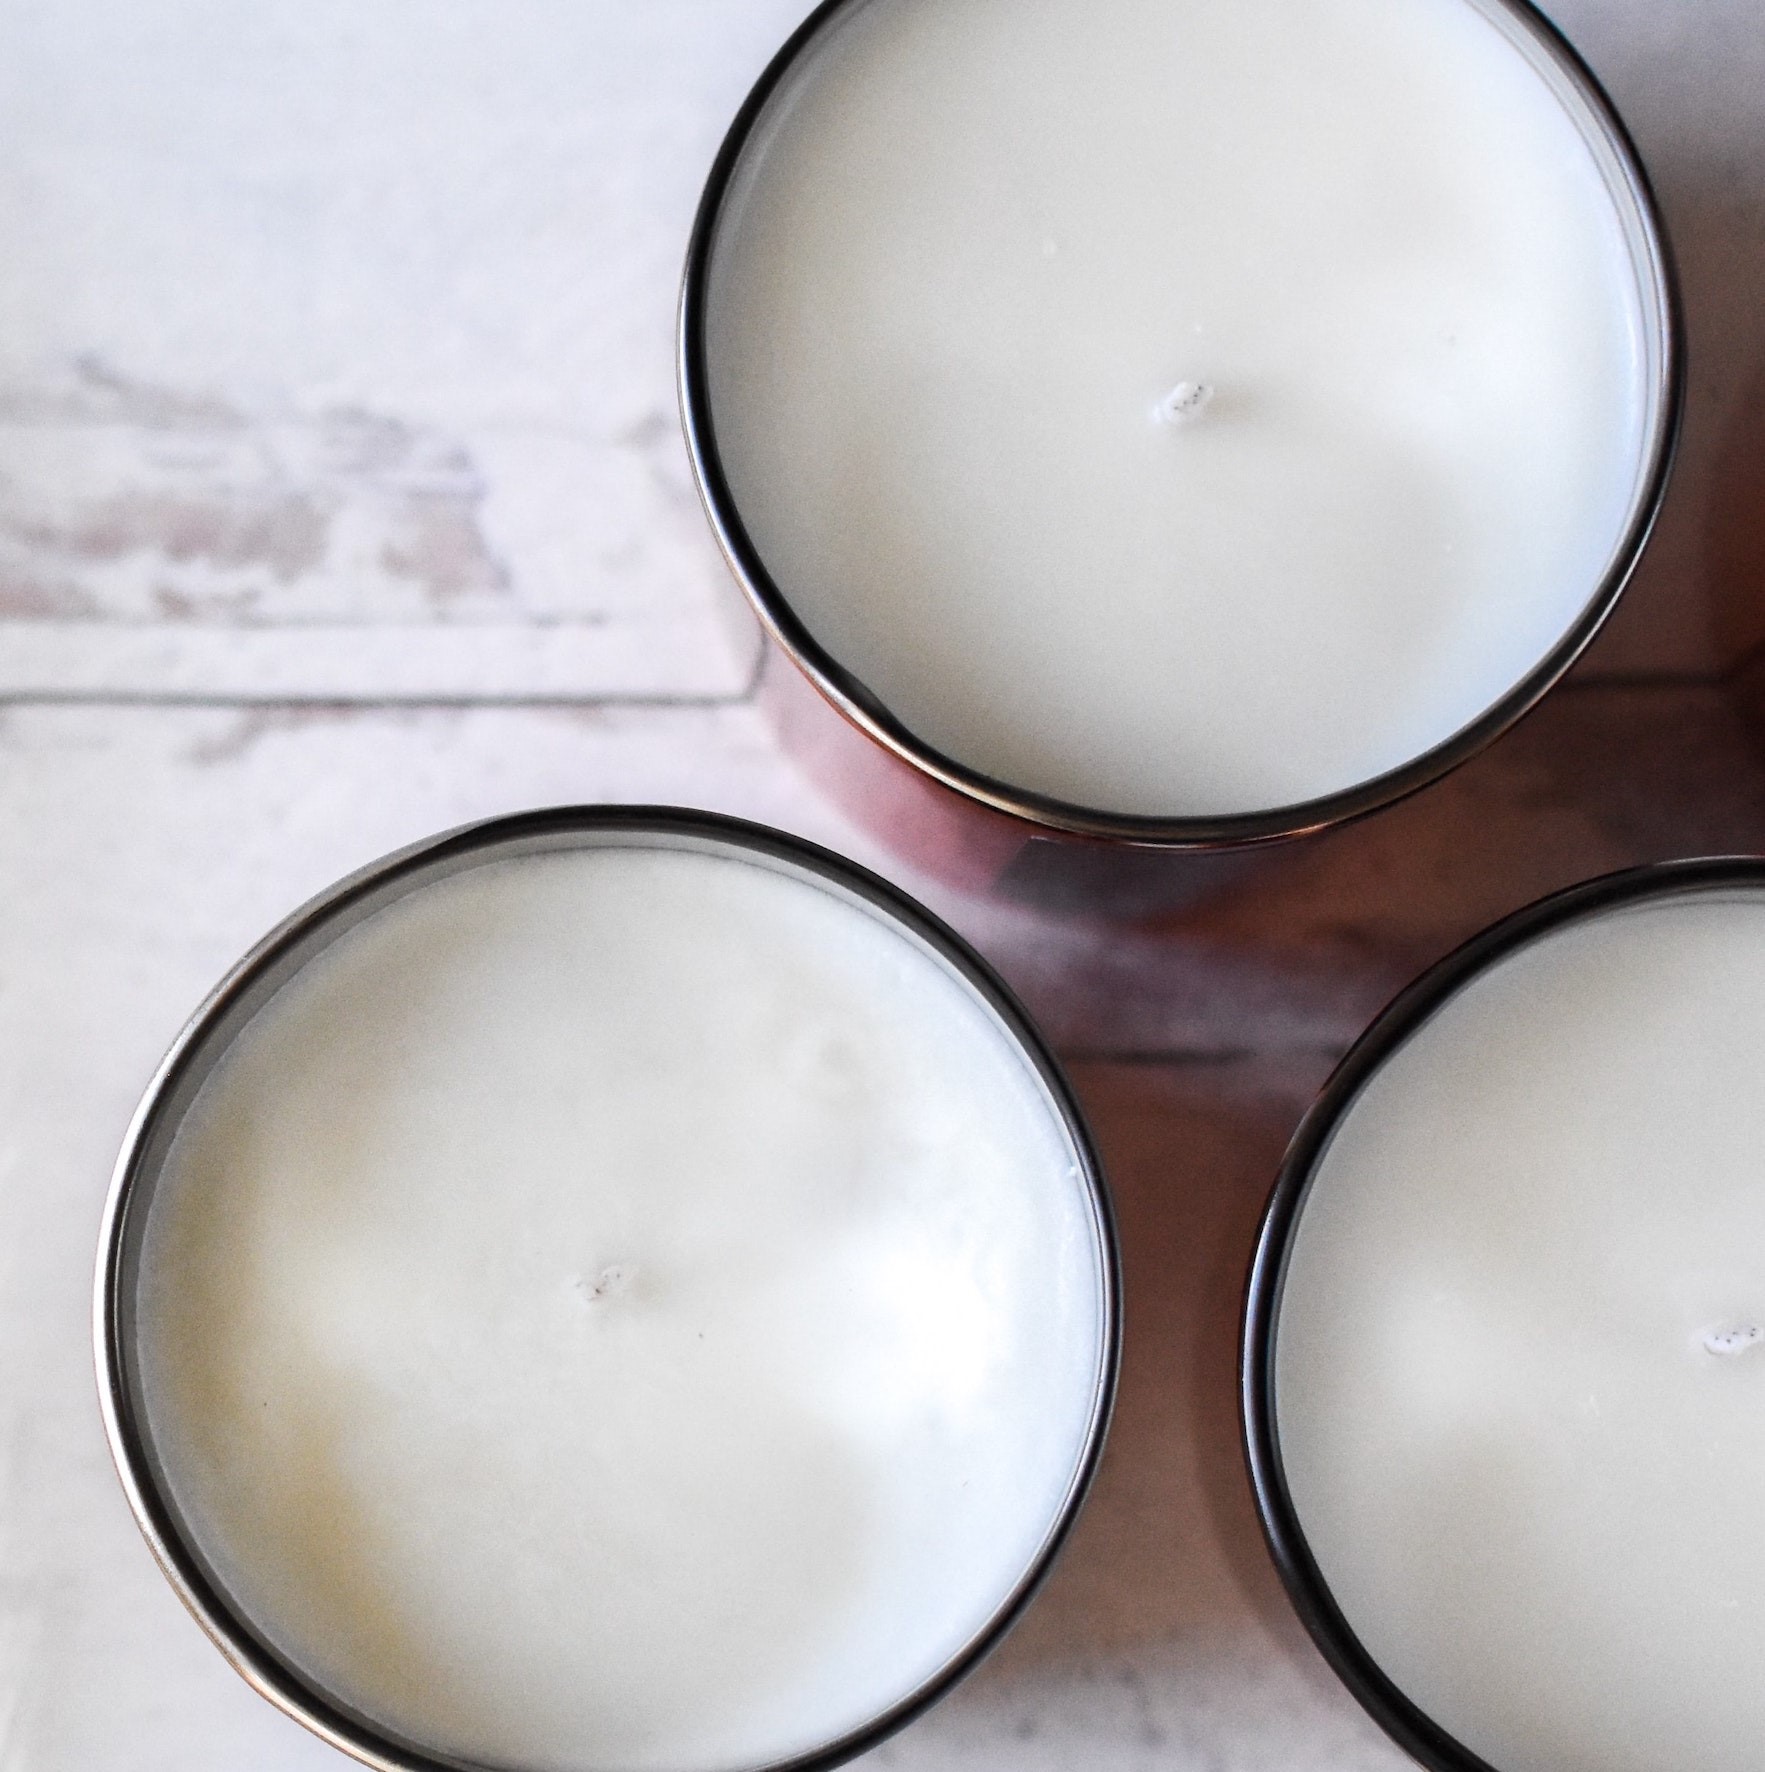 Professional Candle Making Class New York City - Nov. 29